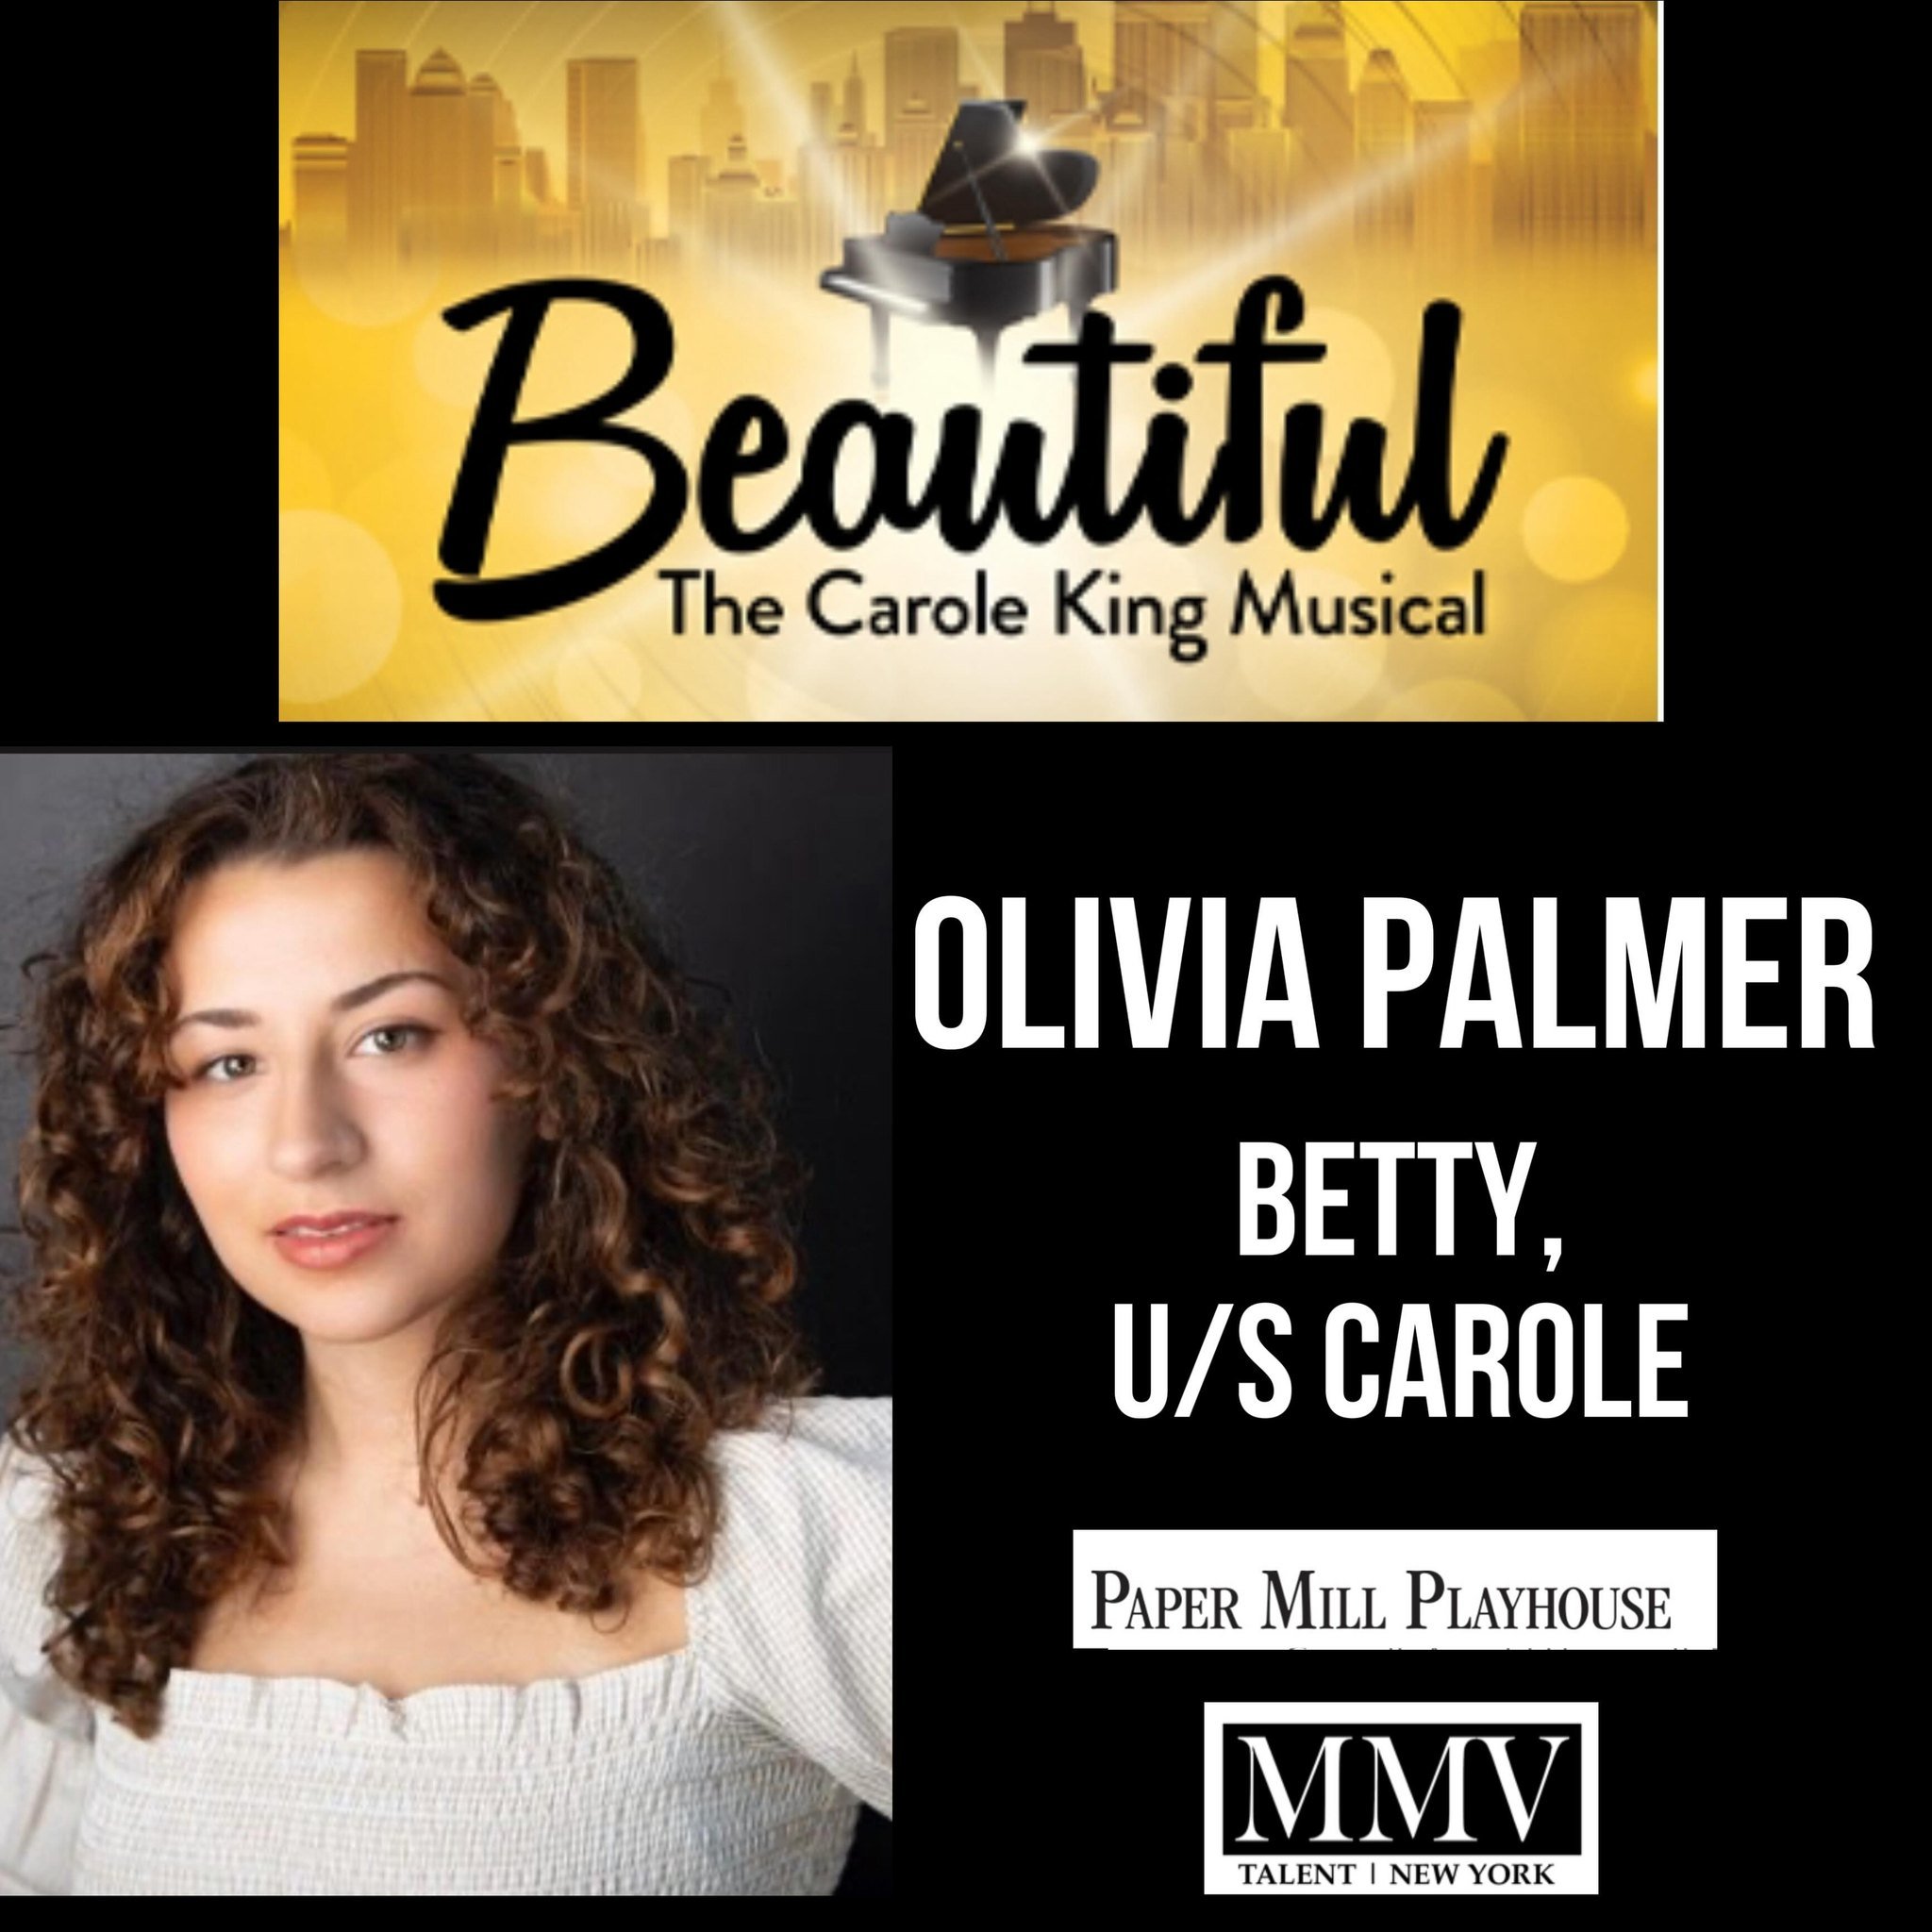 OLIVIA PALMER will be Betty and Understudy Carole in Beautiful at Paper Mill. We can&rsquo;t wait to see her shine. 
@oliviacpalmer 

#mmvtalent